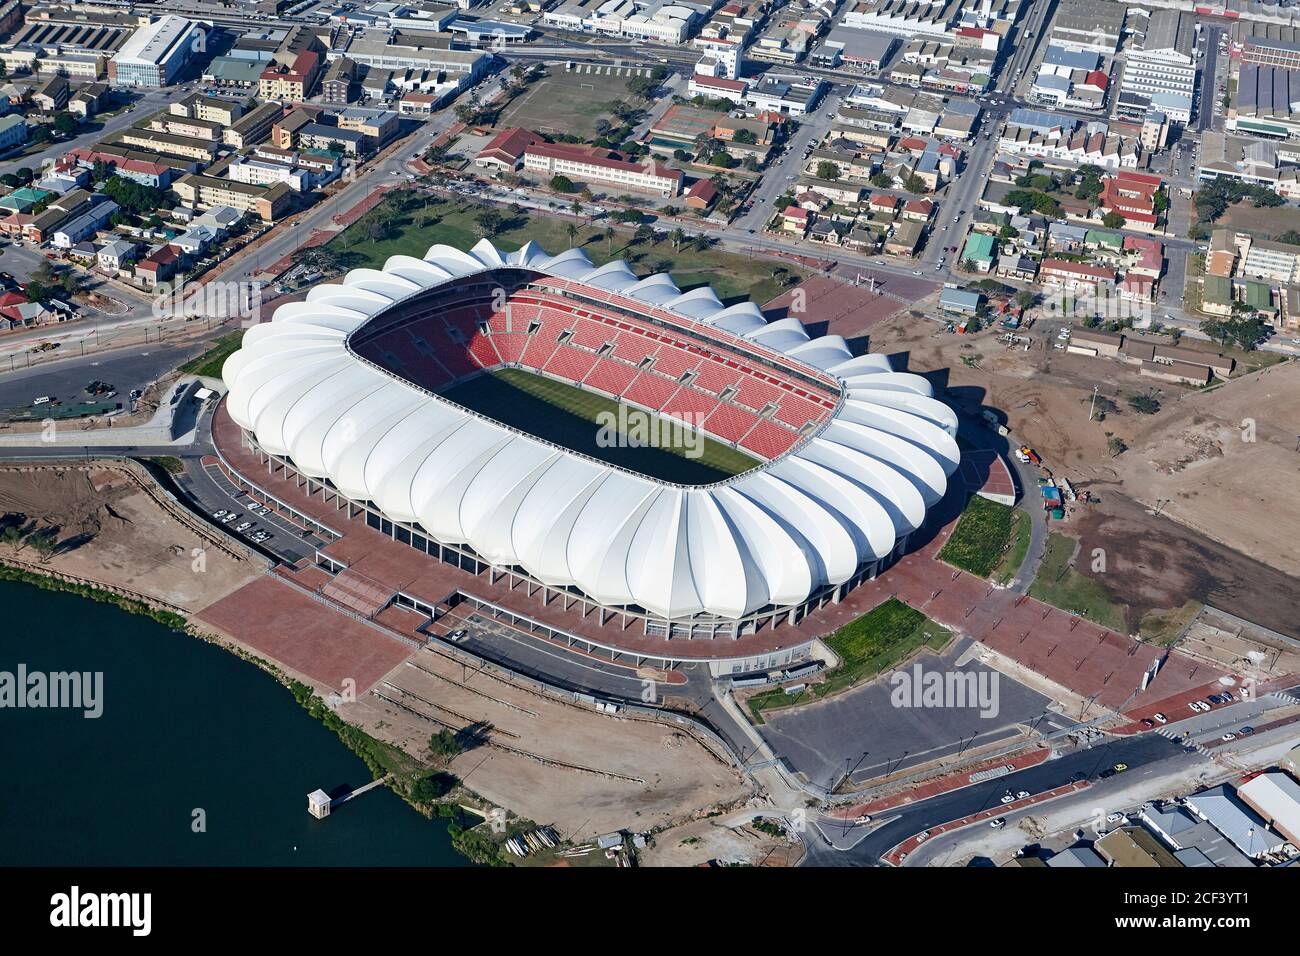 Aerial view of Sport stadium in Port Elizabeth, South Africa, built for the South African World Cup Stock Photo